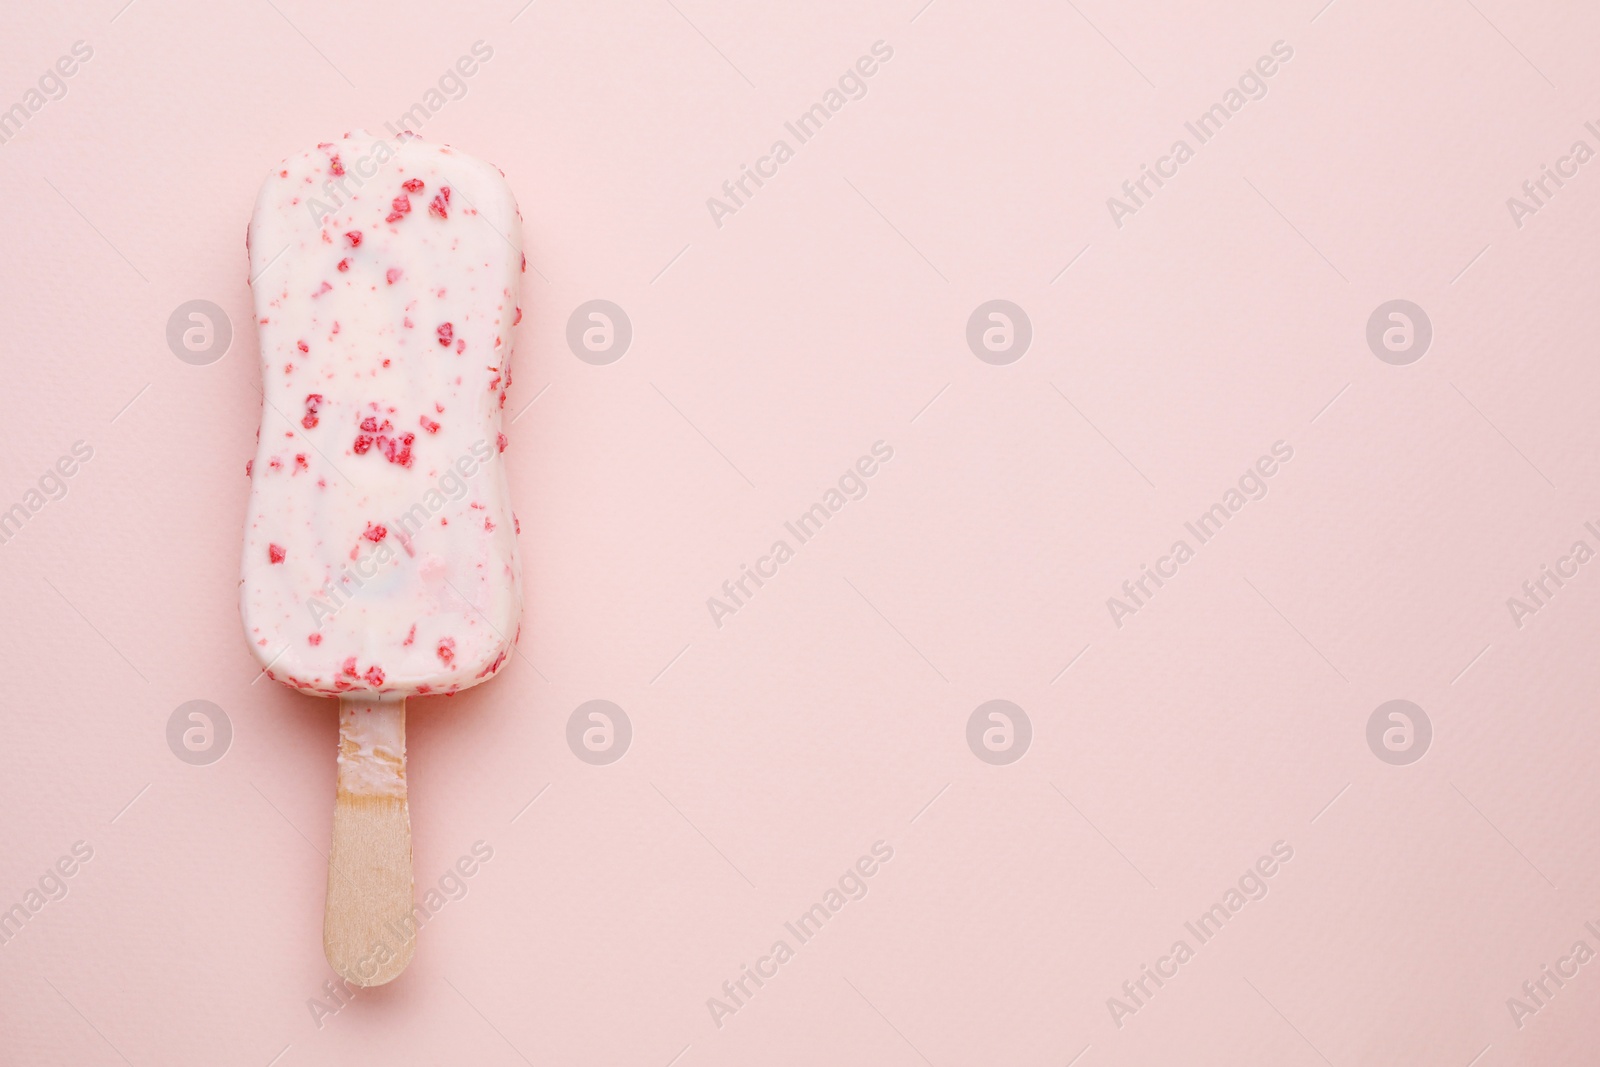 Photo of Delicious glazed ice cream bar on pale pink background, top view. Space for text